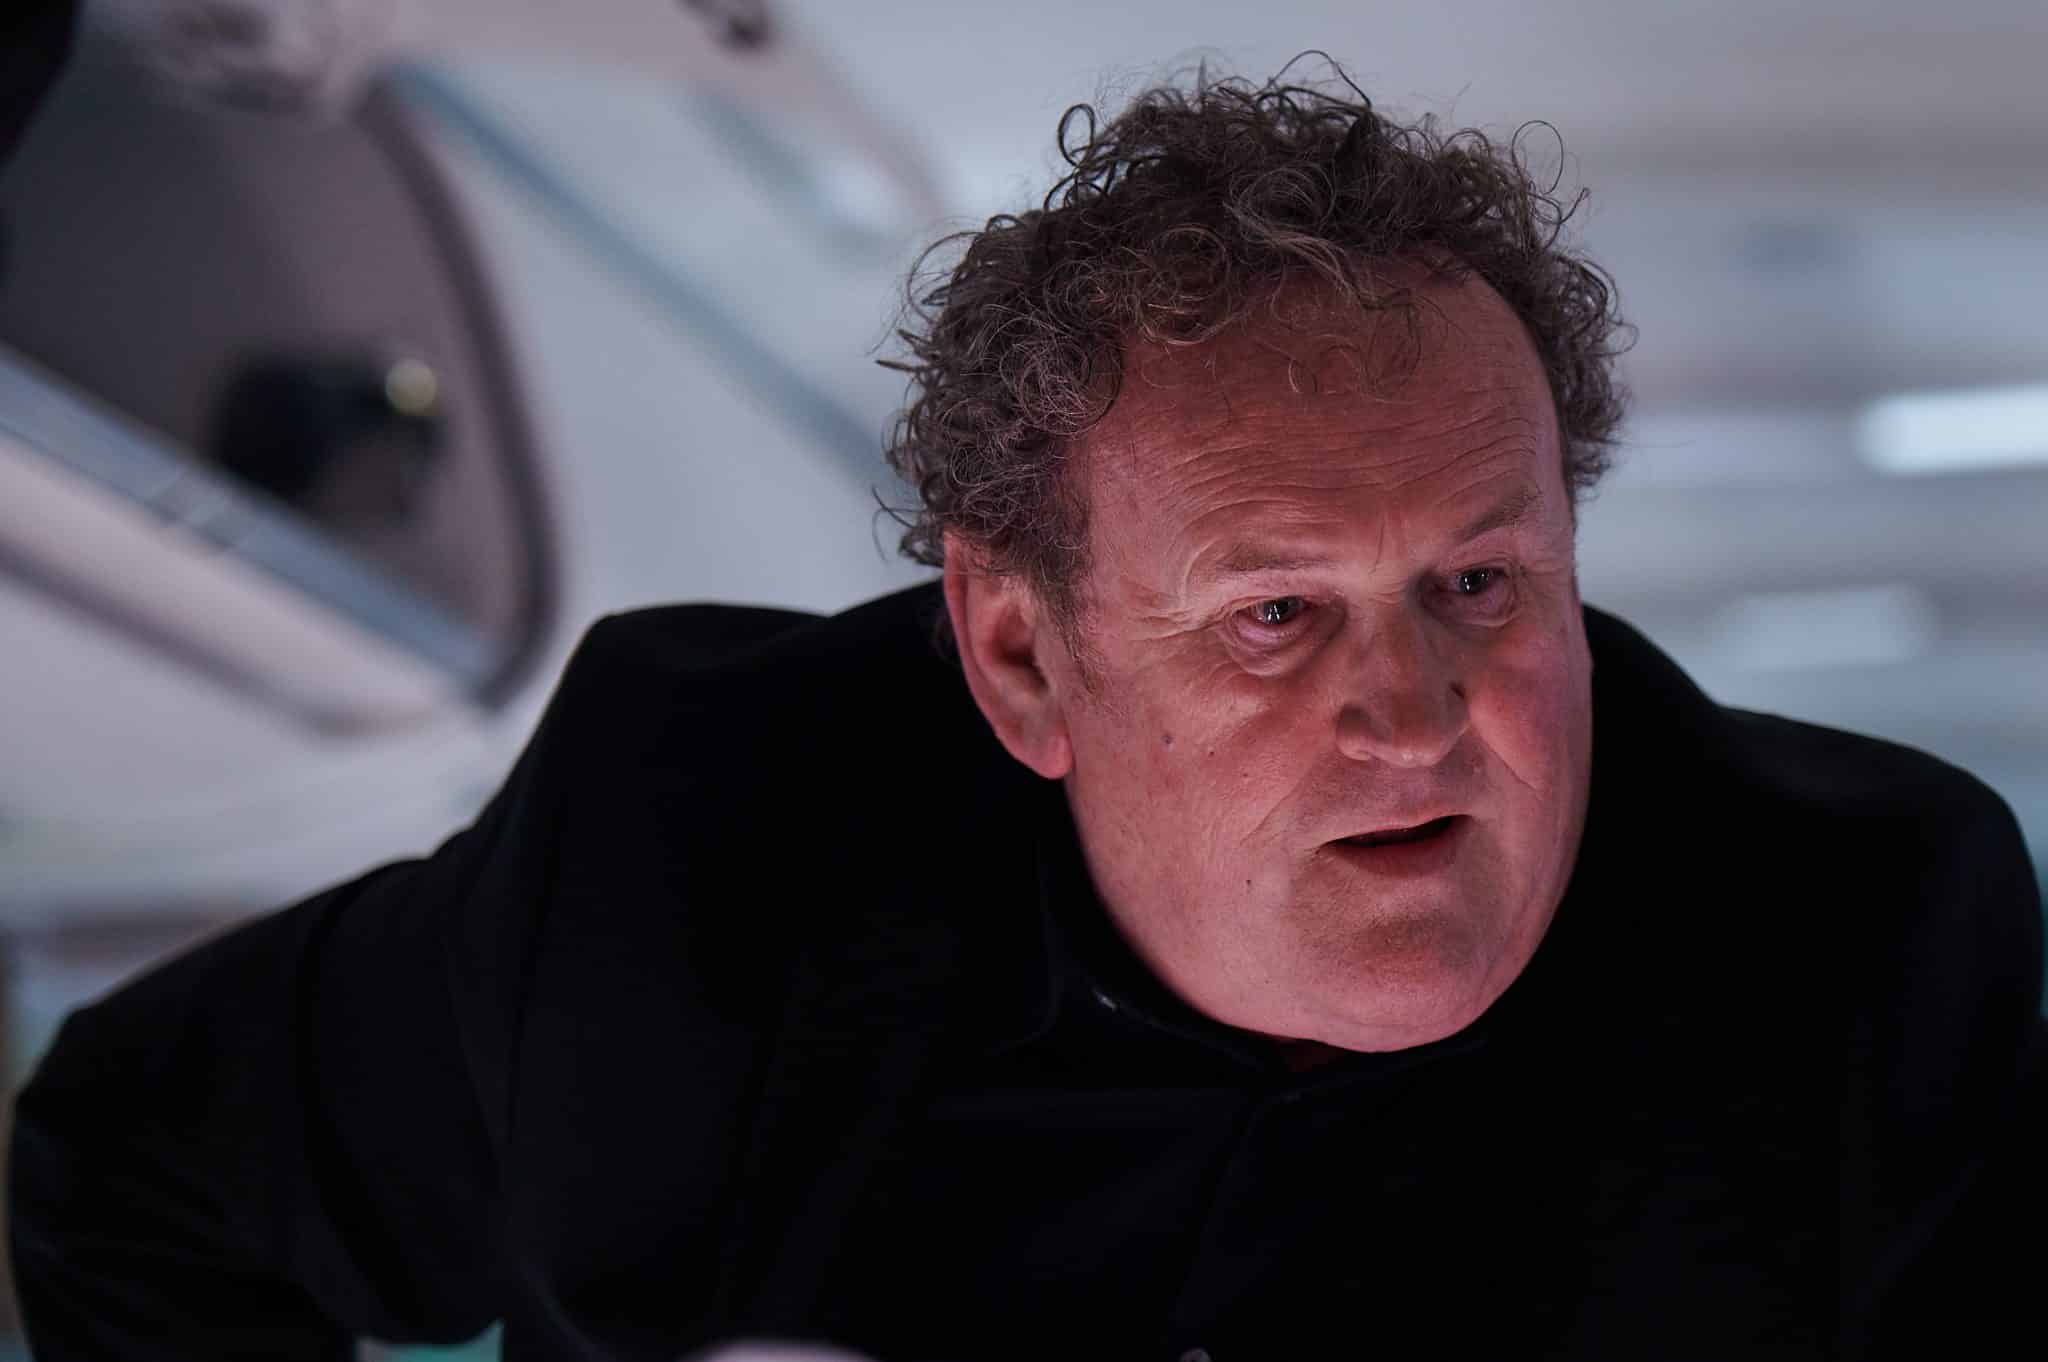 First look at survival thriller 'No Way Up' with Colm Meaney